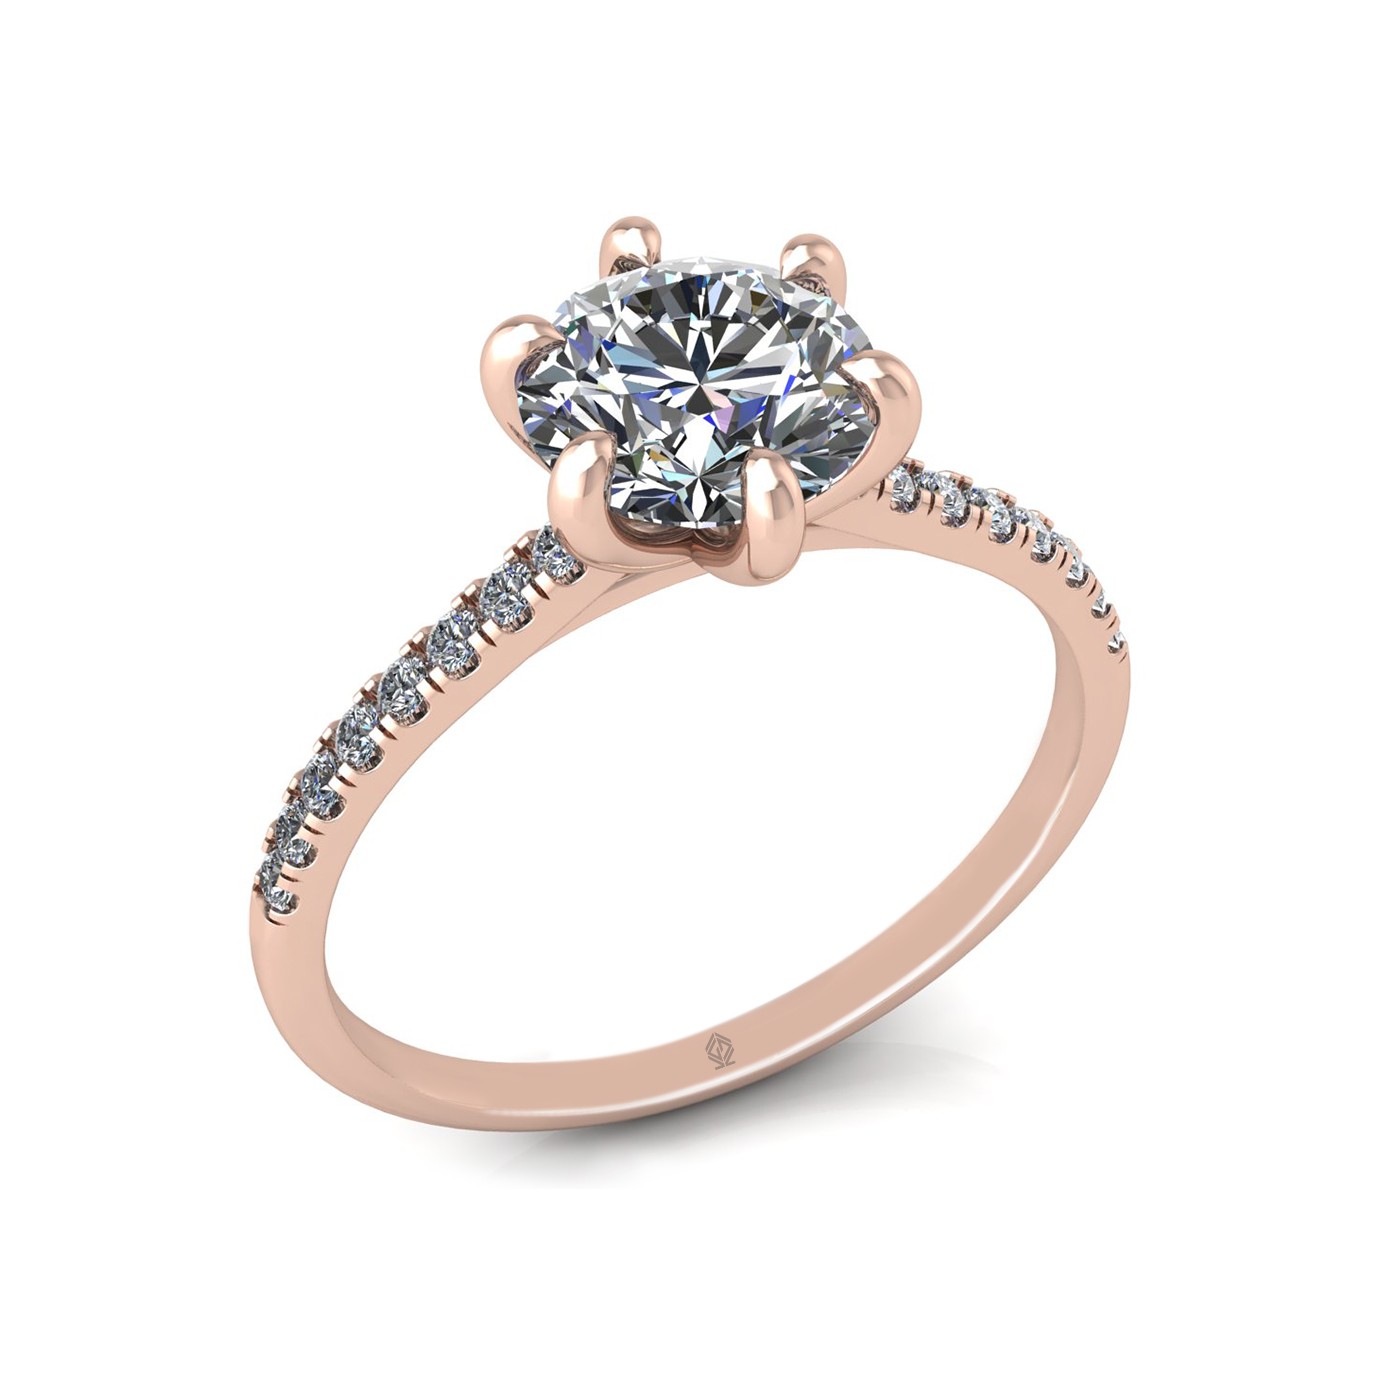 18k rose gold 1,20 ct 6 prongs round cut diamond engagement ring with whisper thin pavÉ set band